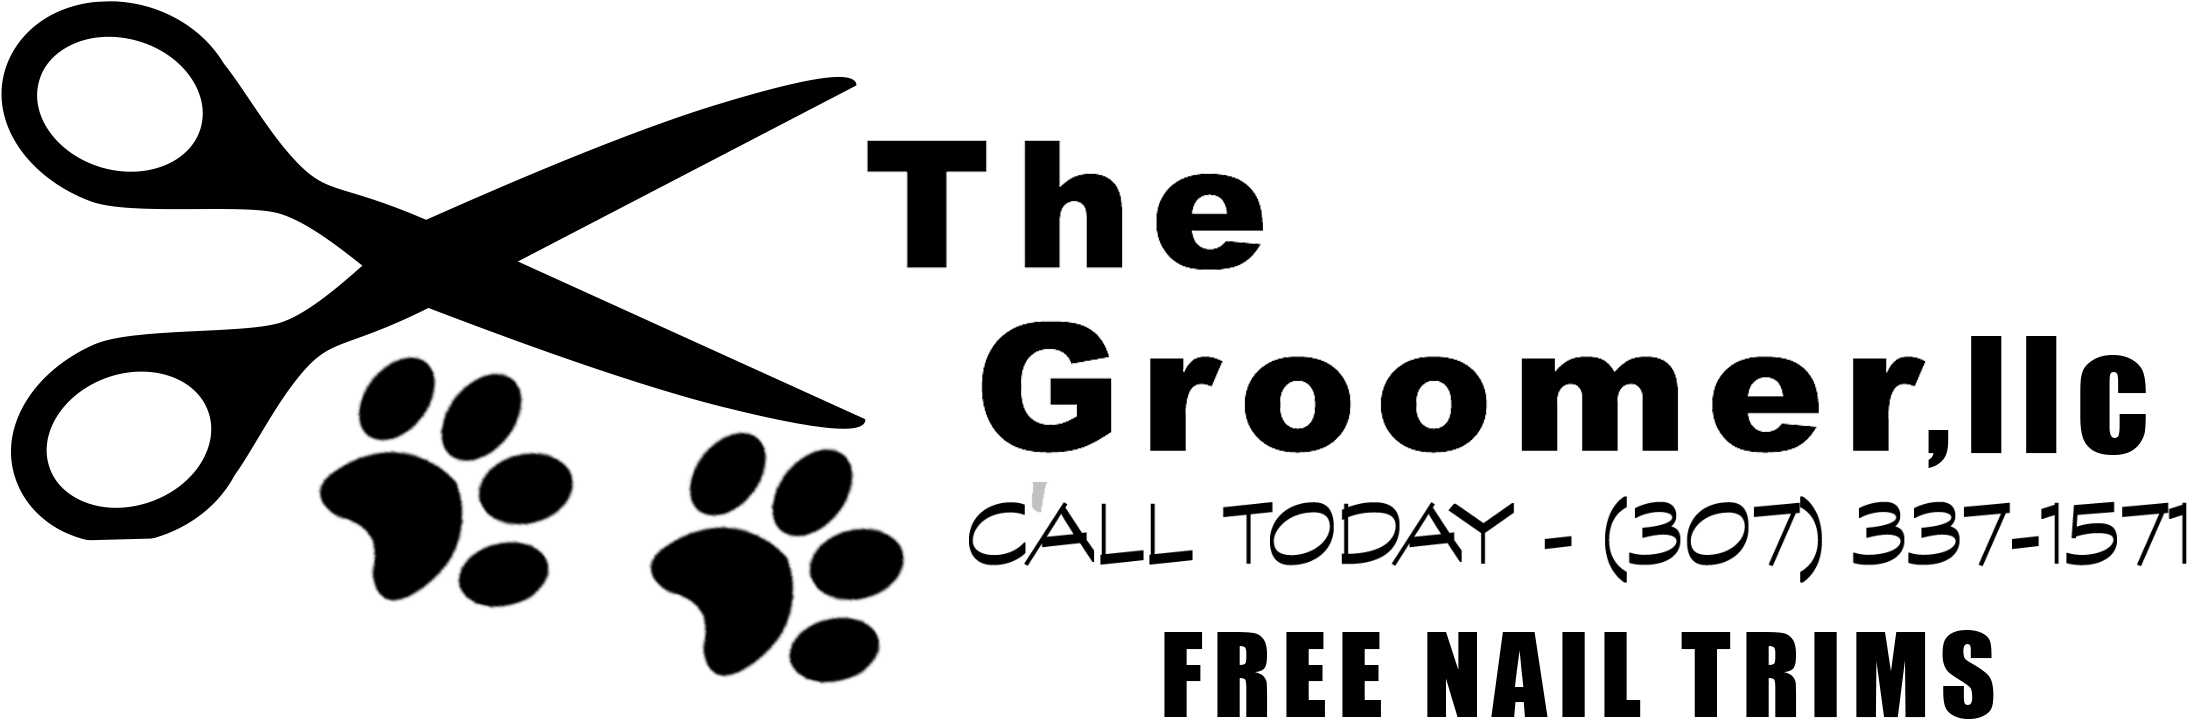 Download 307 337 Dog Grooming Logo Free Png Image With No